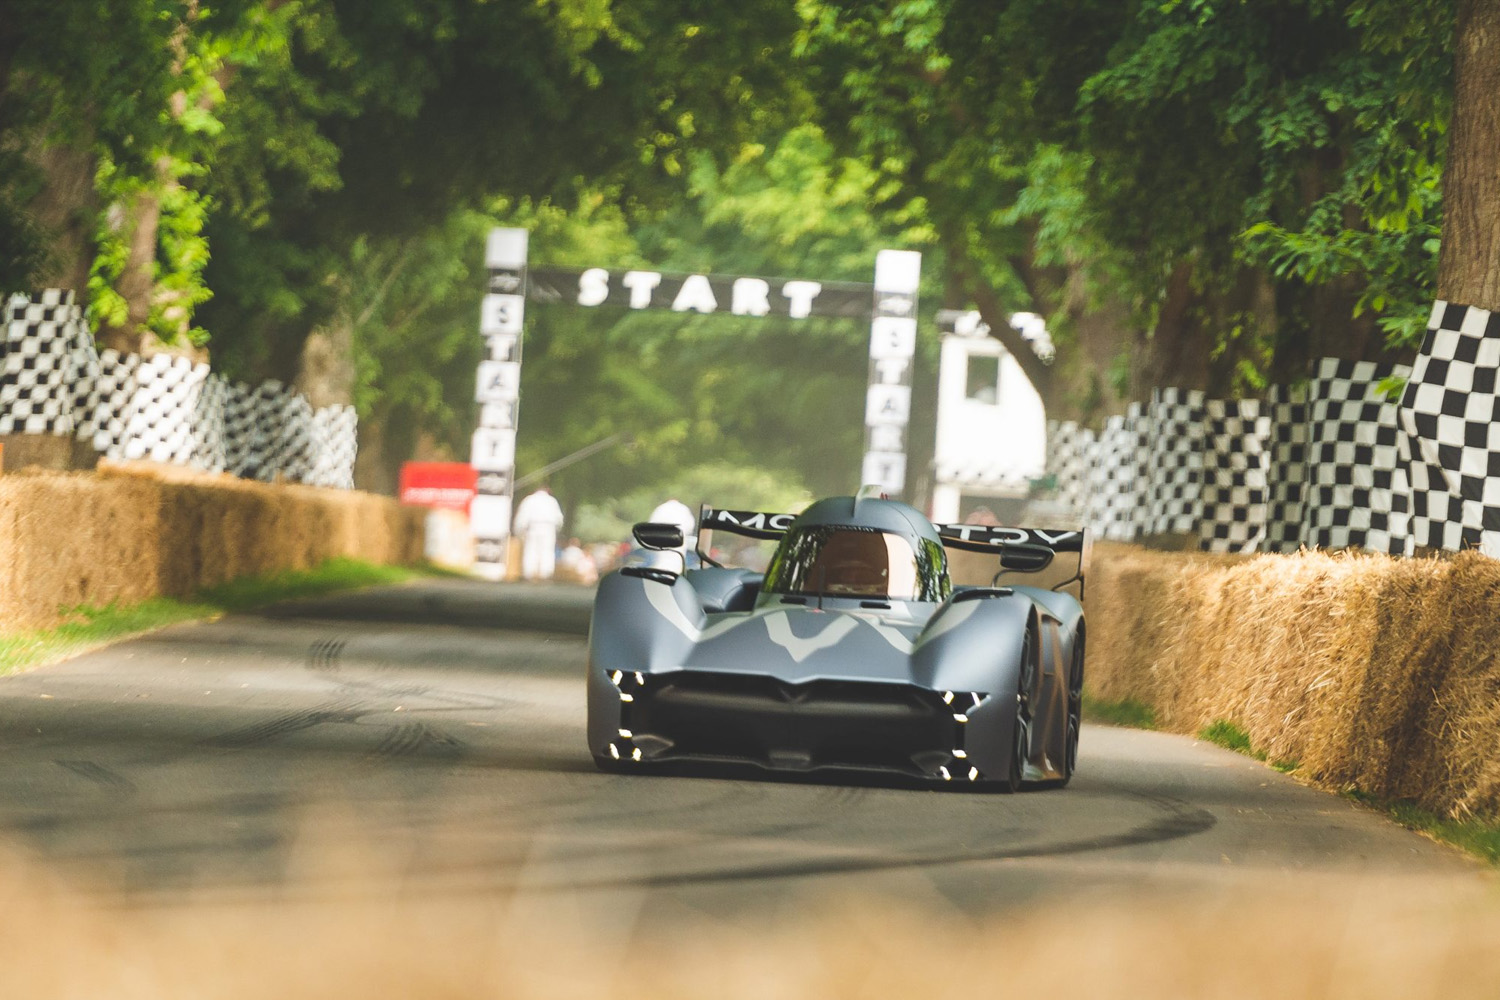 McMurty Speirling Electric EV Hypercar Shortly After Starting the Goodwood Festival of Speed ​​Course